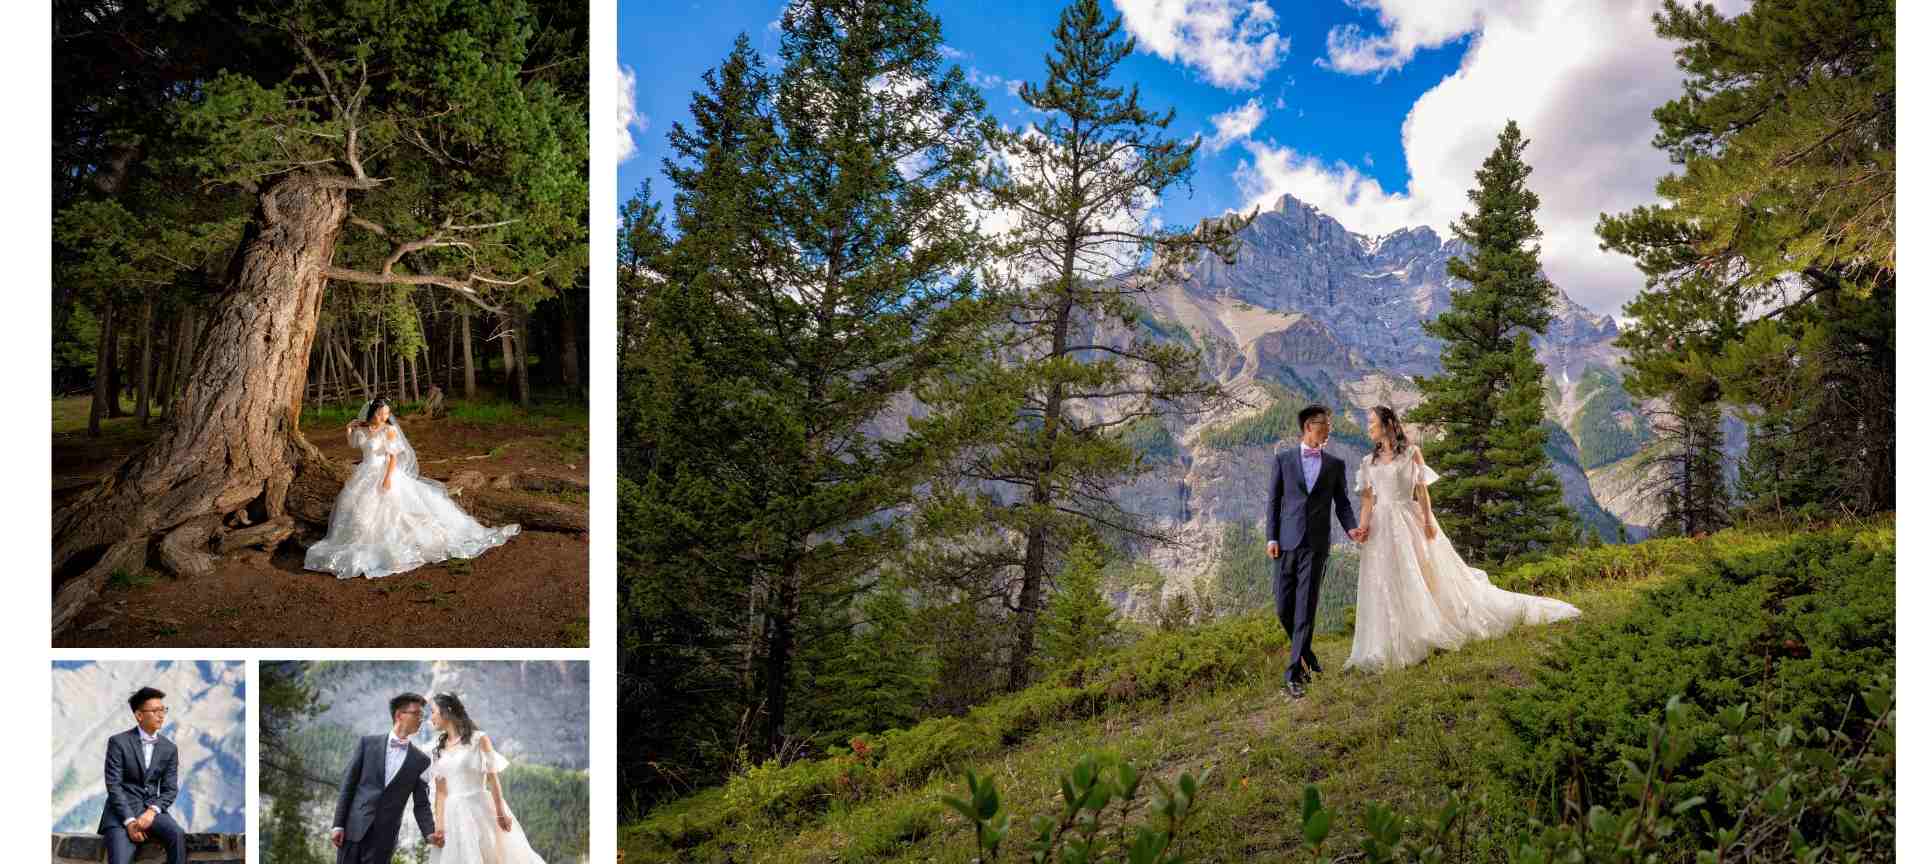 elope to banff national park - rocky mountains wedding